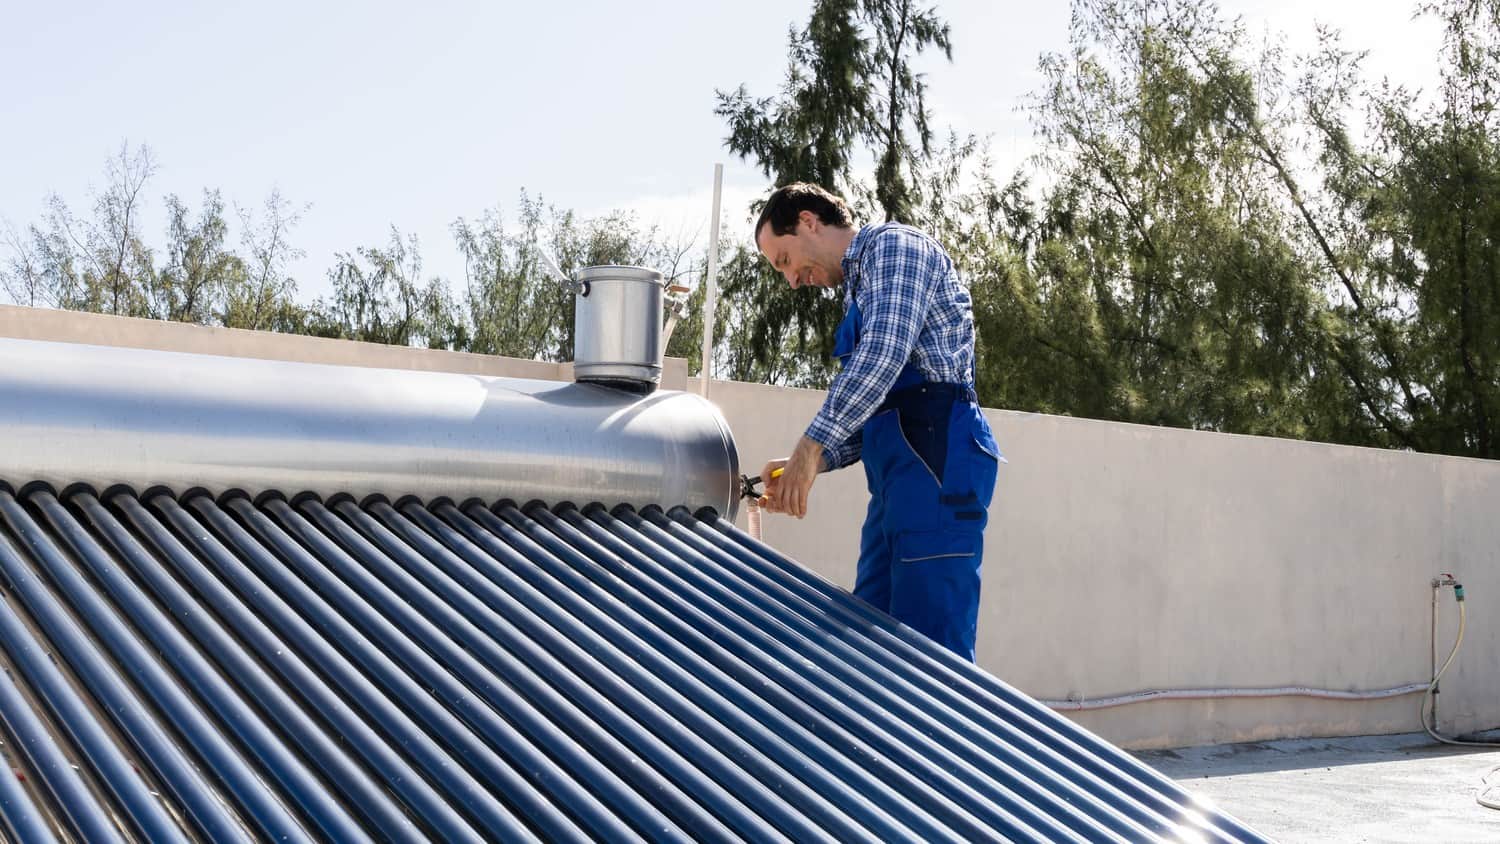 A close-up view of a solar heating system with pipes and panels, capturing the concept of harnessing solar energy for heating purposes.